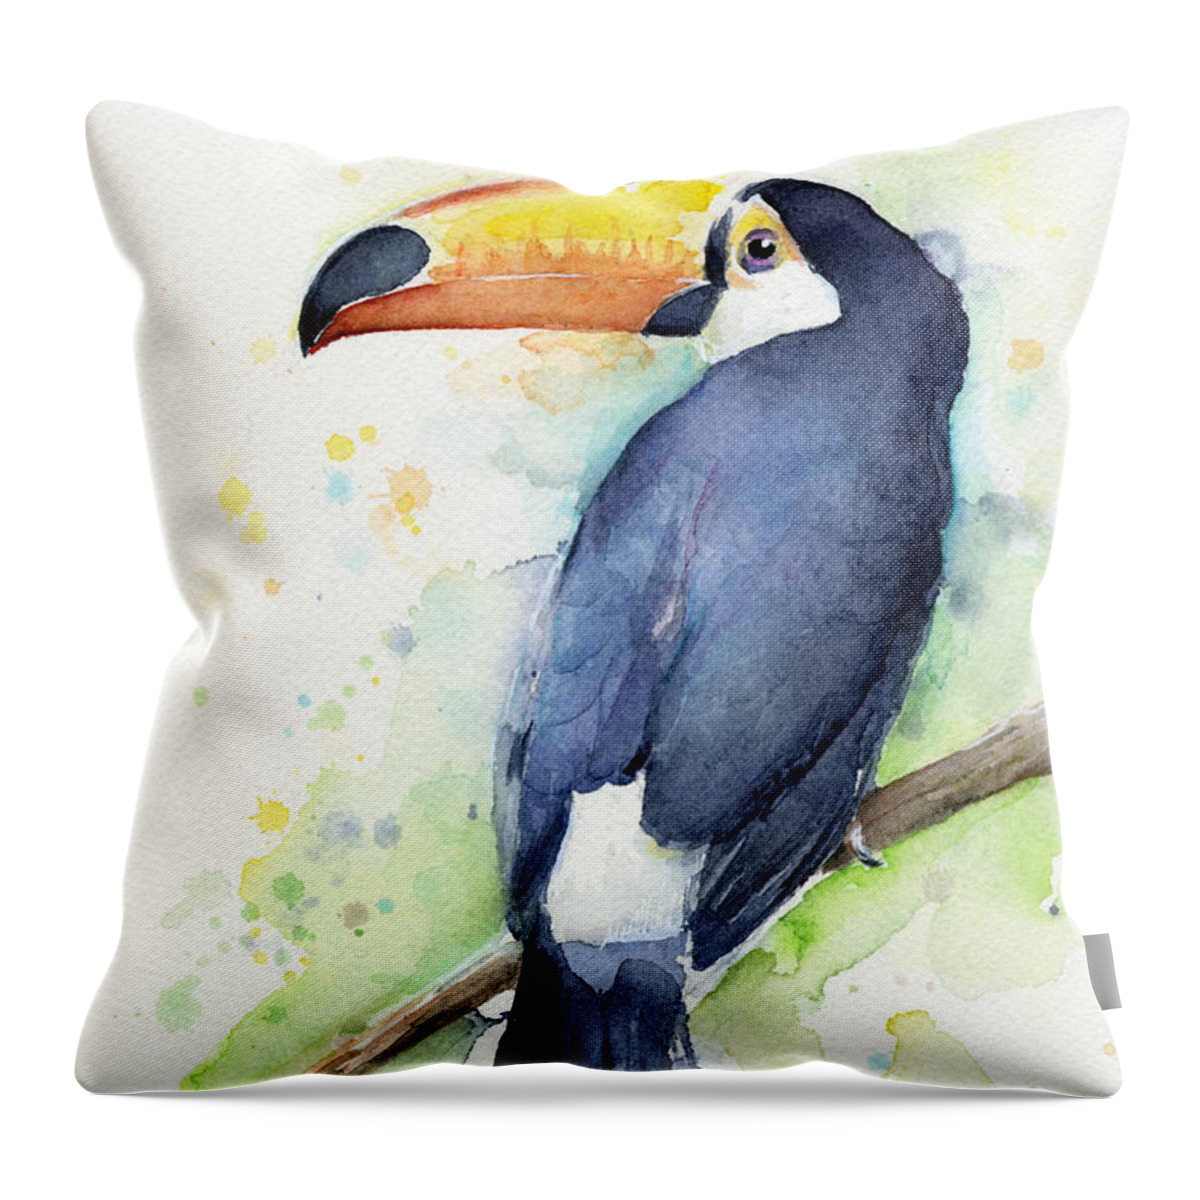 Watercolor Toucan Throw Pillow featuring the painting Toucan Watercolor by Olga Shvartsur